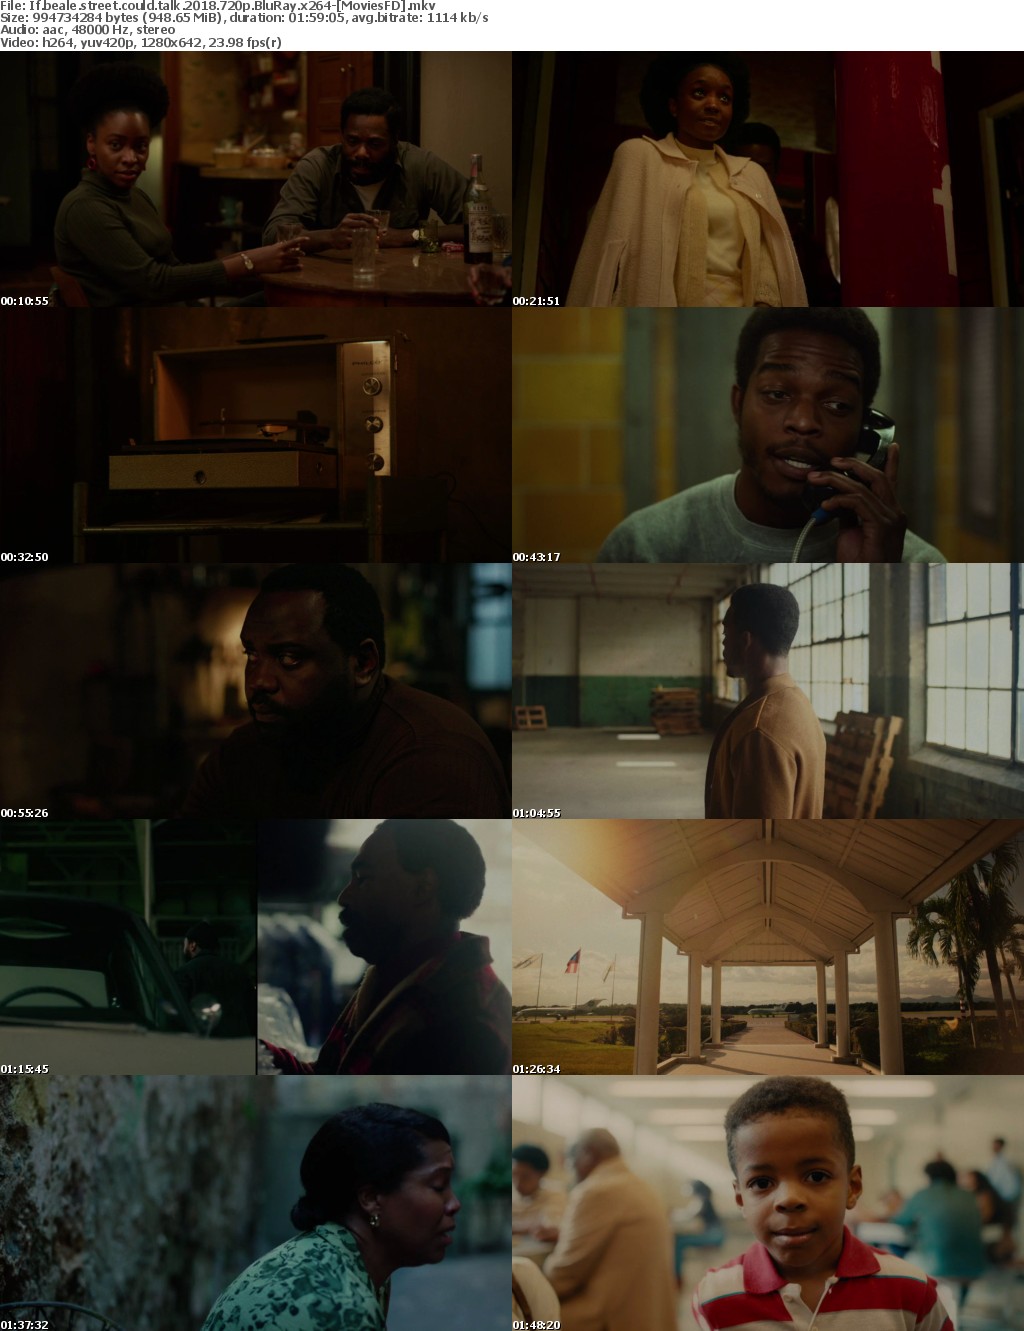 If Beale Street Could Talk (2018) 720p BluRay x264- MoviesFD